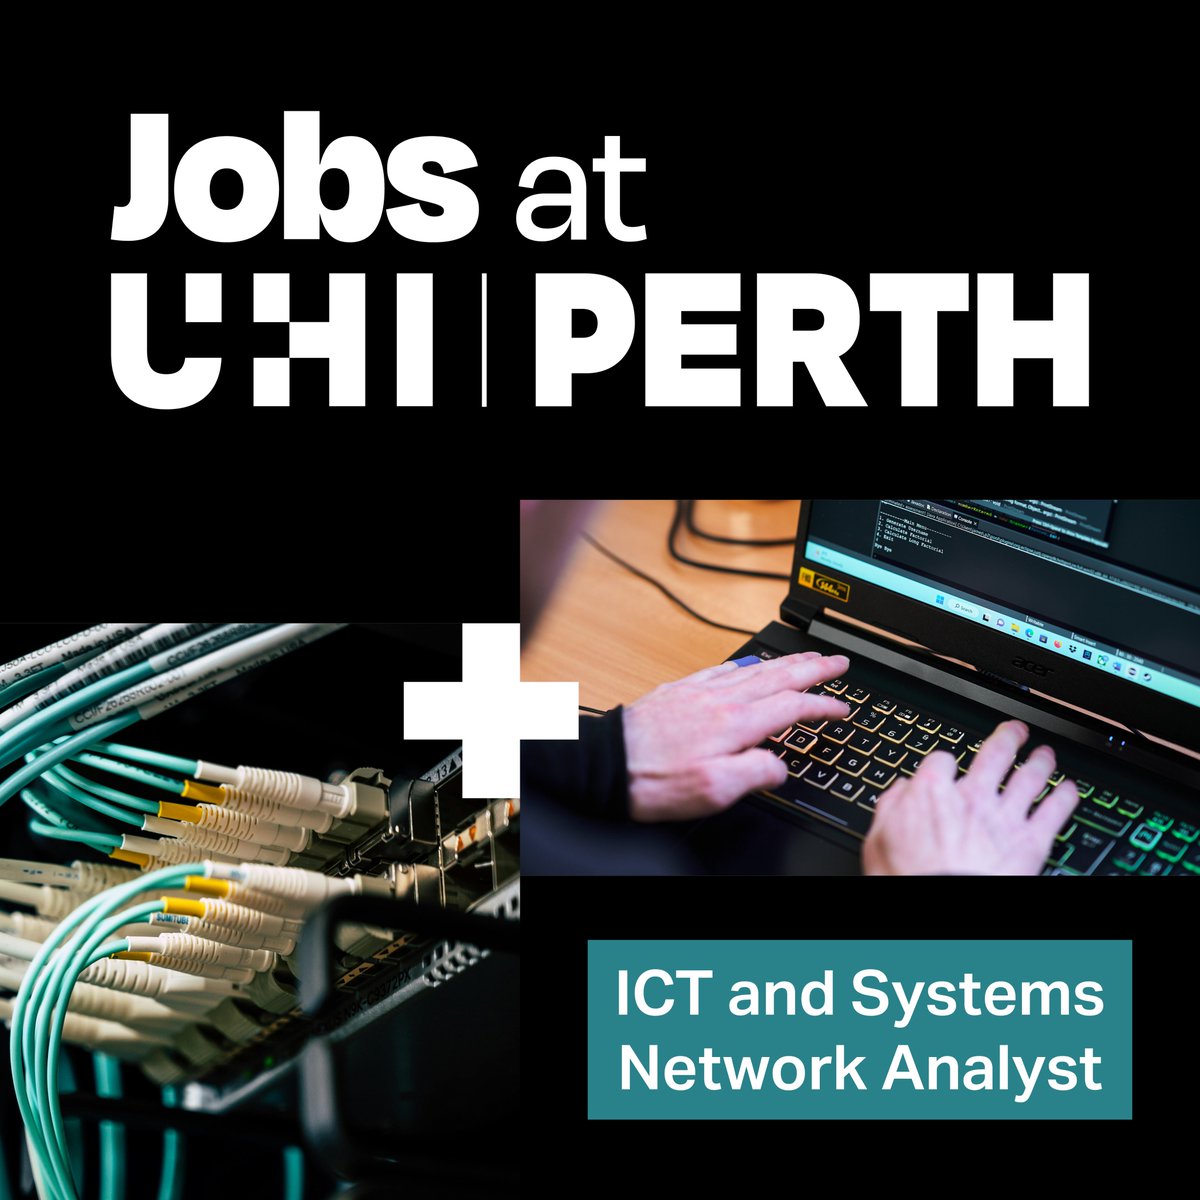 NEW VACANCY ➕ ICT and Systems Network Analyst
Full Time, Permanent
35 Hours per Week
£30,752 - £33,780 per annum (Pay Award Pending)

More info and apply➡️ tinyurl.com/s2x3dvzh

Closing Date➡️ 23:45 Mon 29 April 24

#ICTjobs #ICT #SystemsNetworkAnalyst #Perth #PerthandKinross